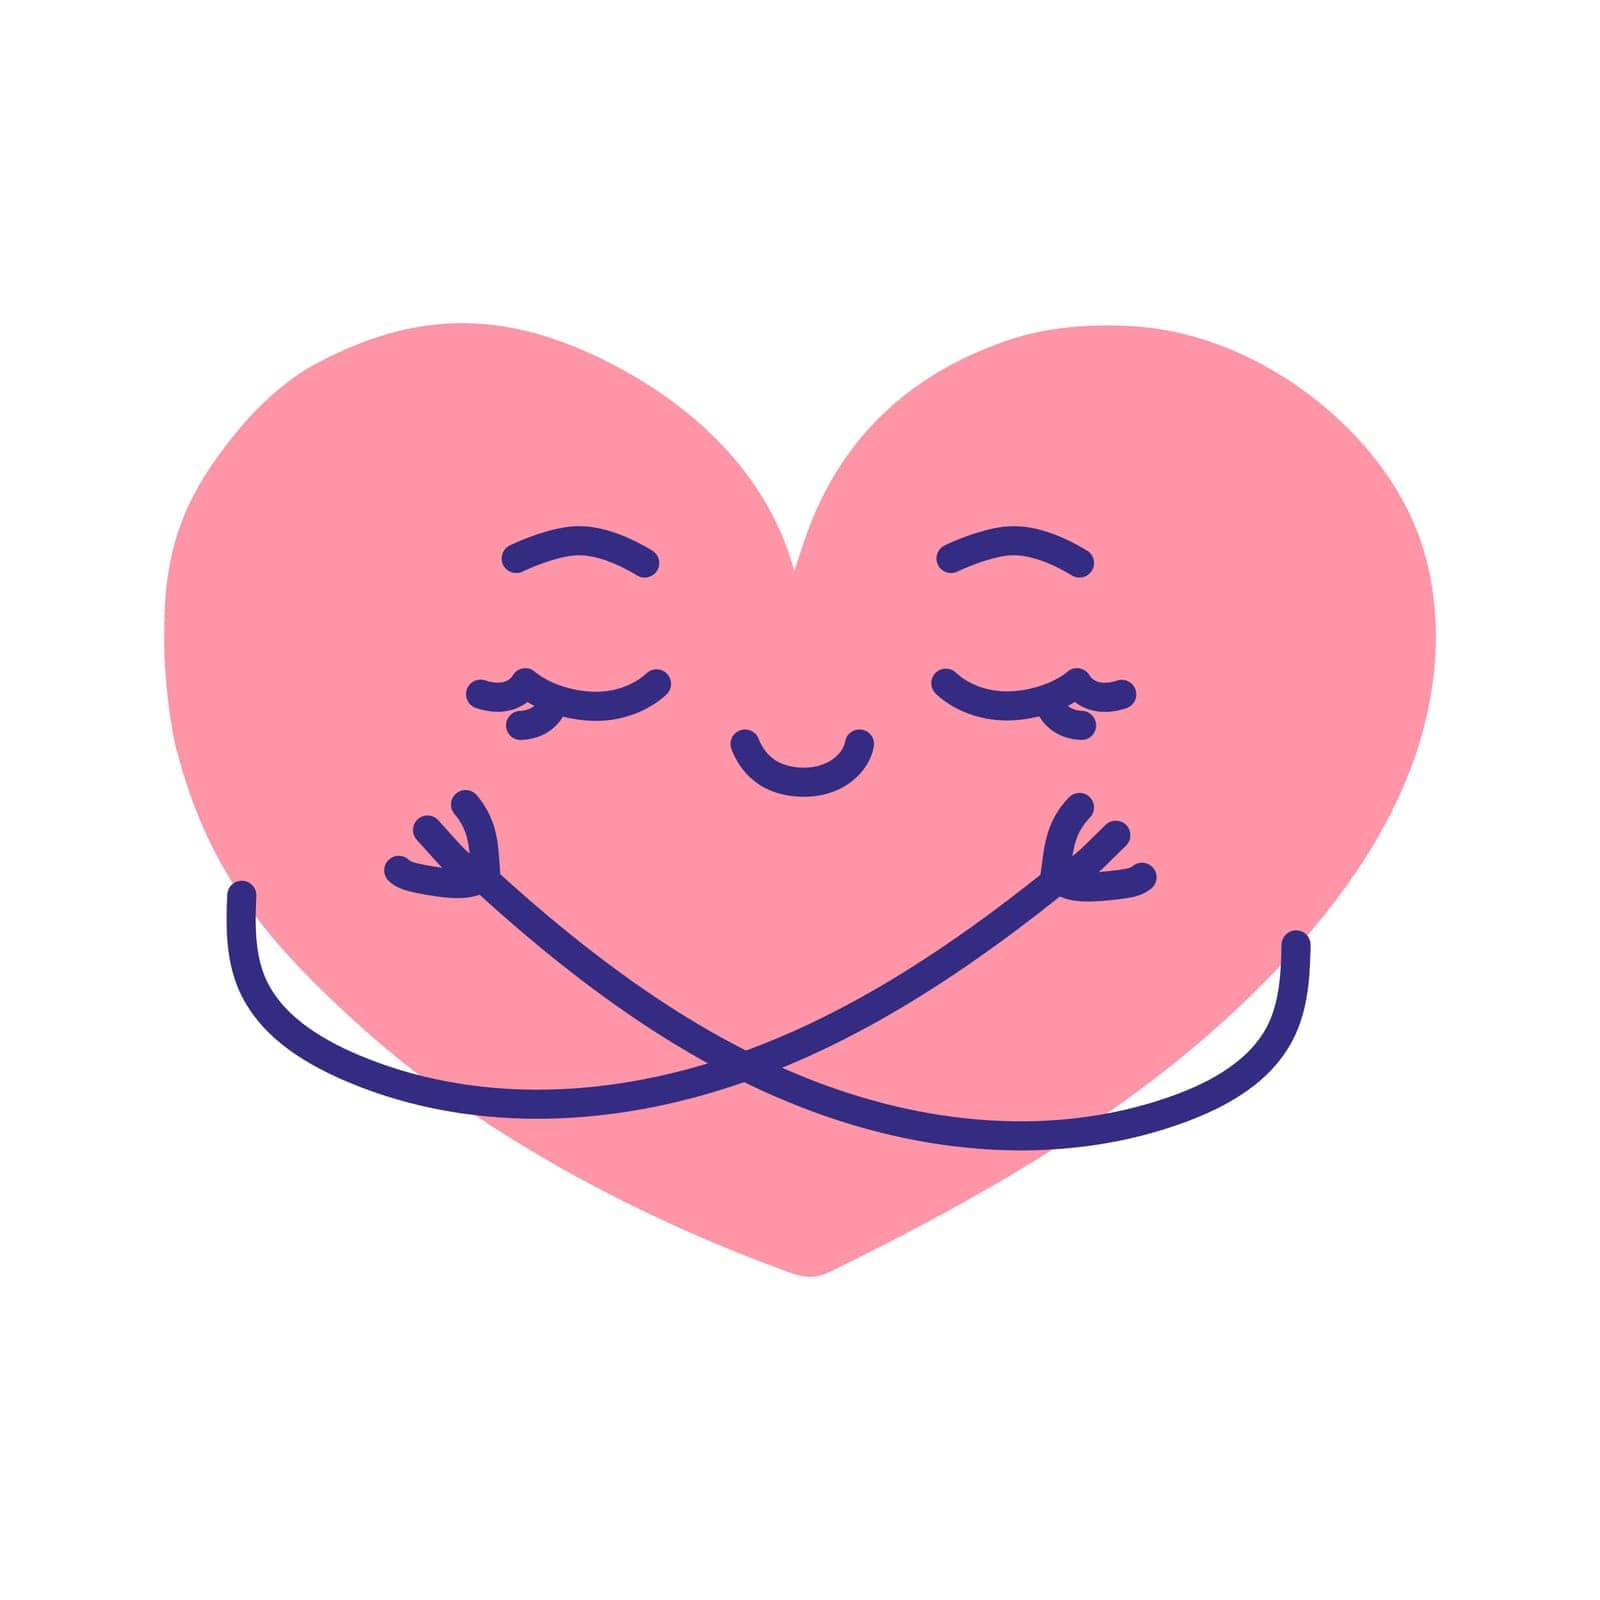 Heart hugging itself. Self care, love yourself concept vector illustration. by Anny_Sketches